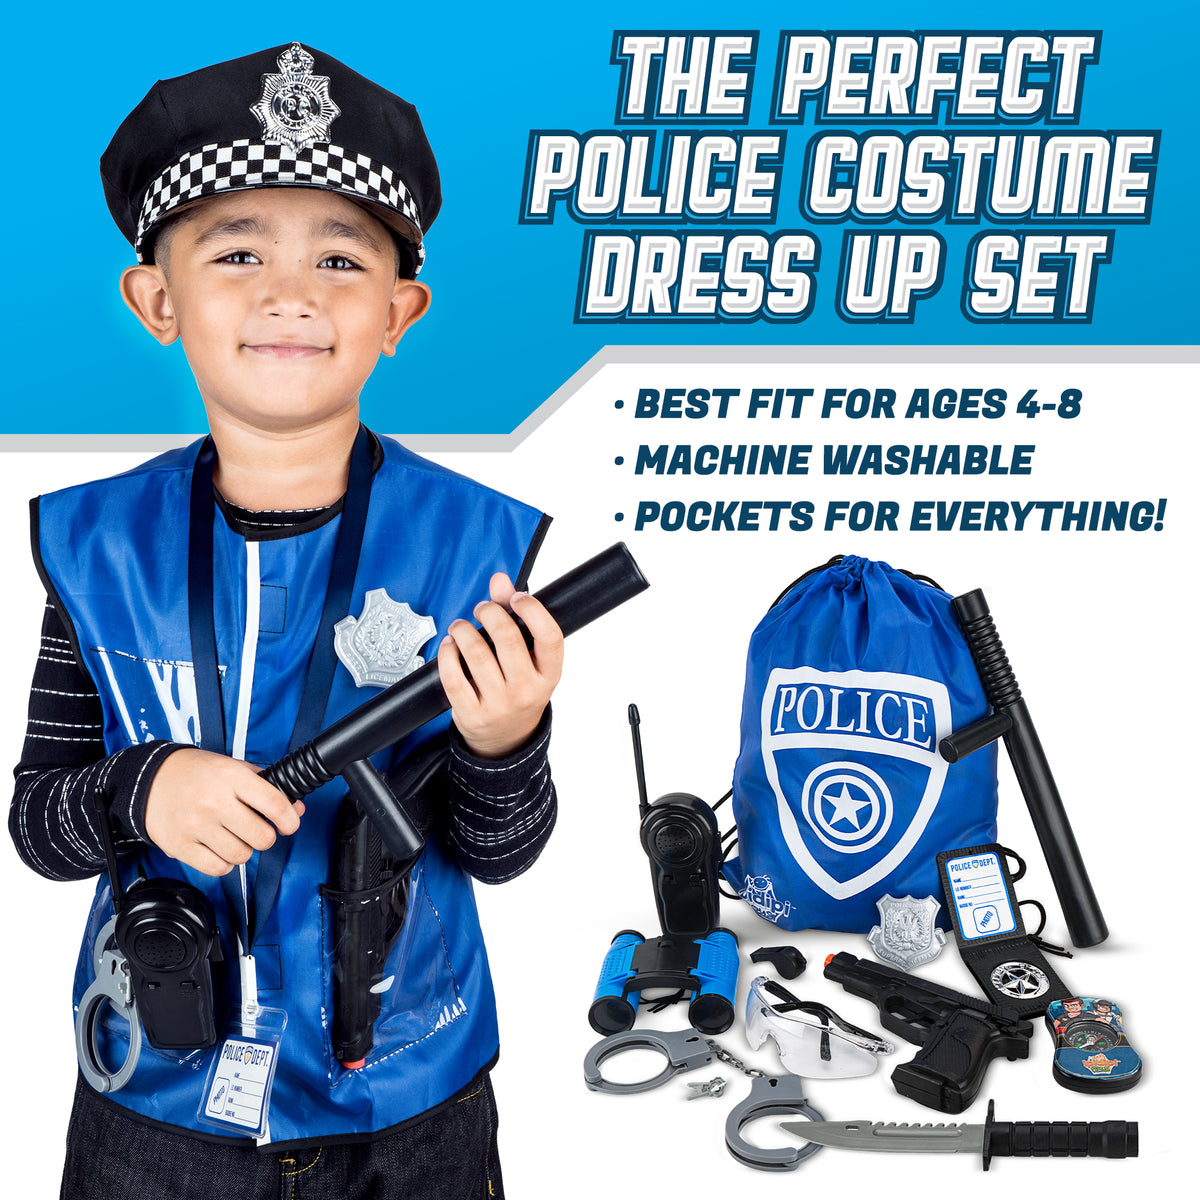 Police Officer Role Play Kit - 15 Piece Policeman Pretend Play Set